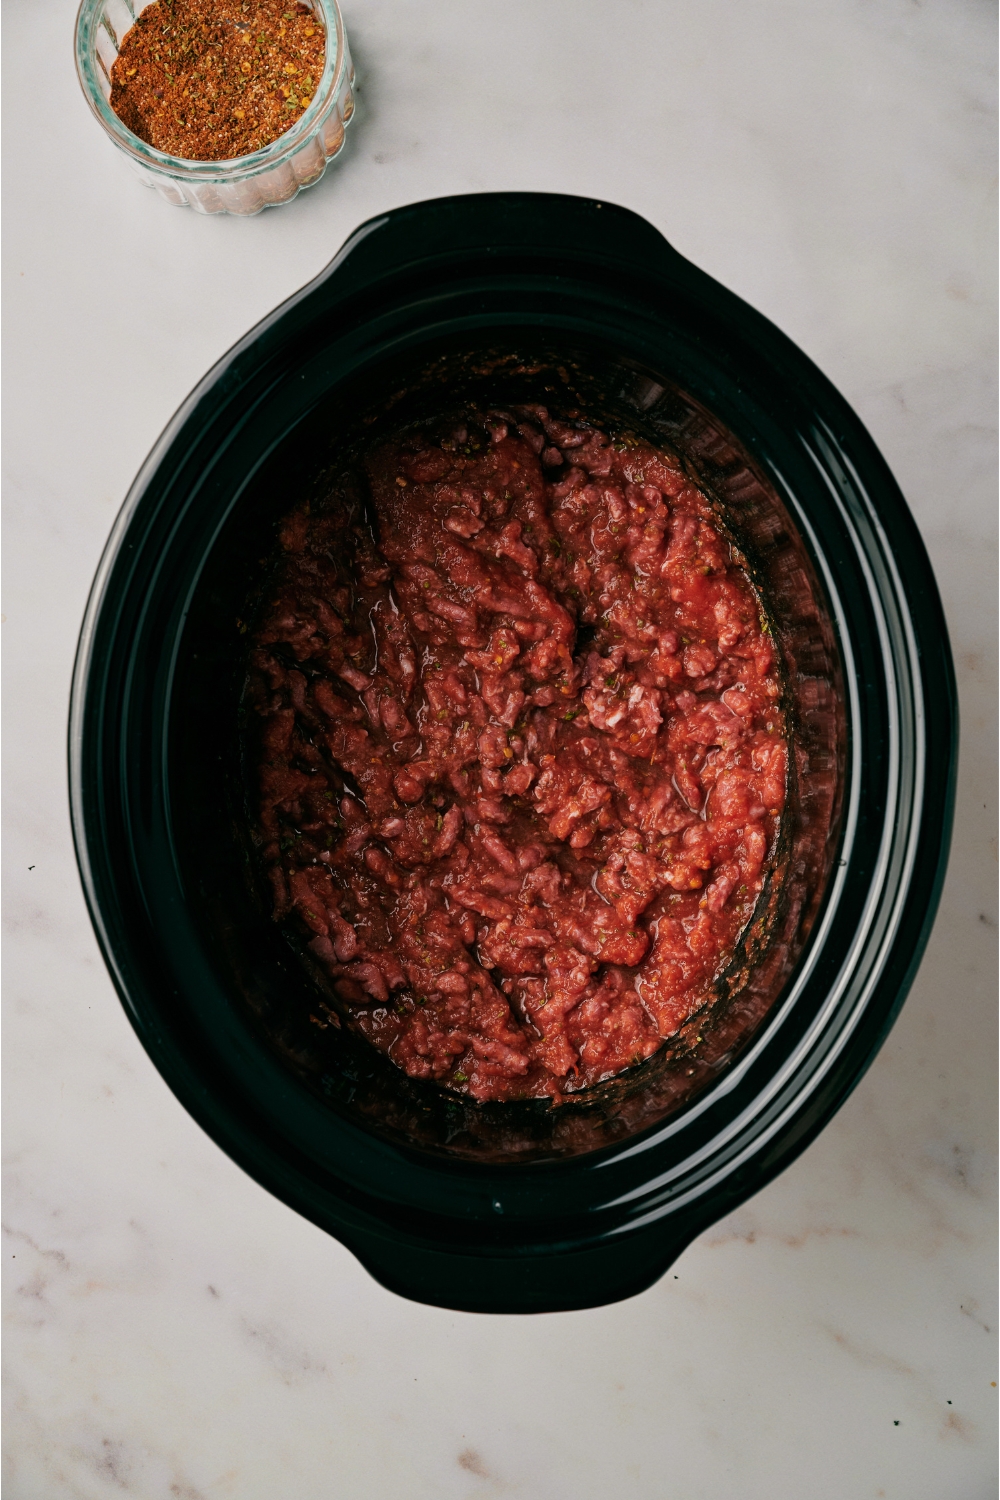 A slow cooker filled with raw ground beef.